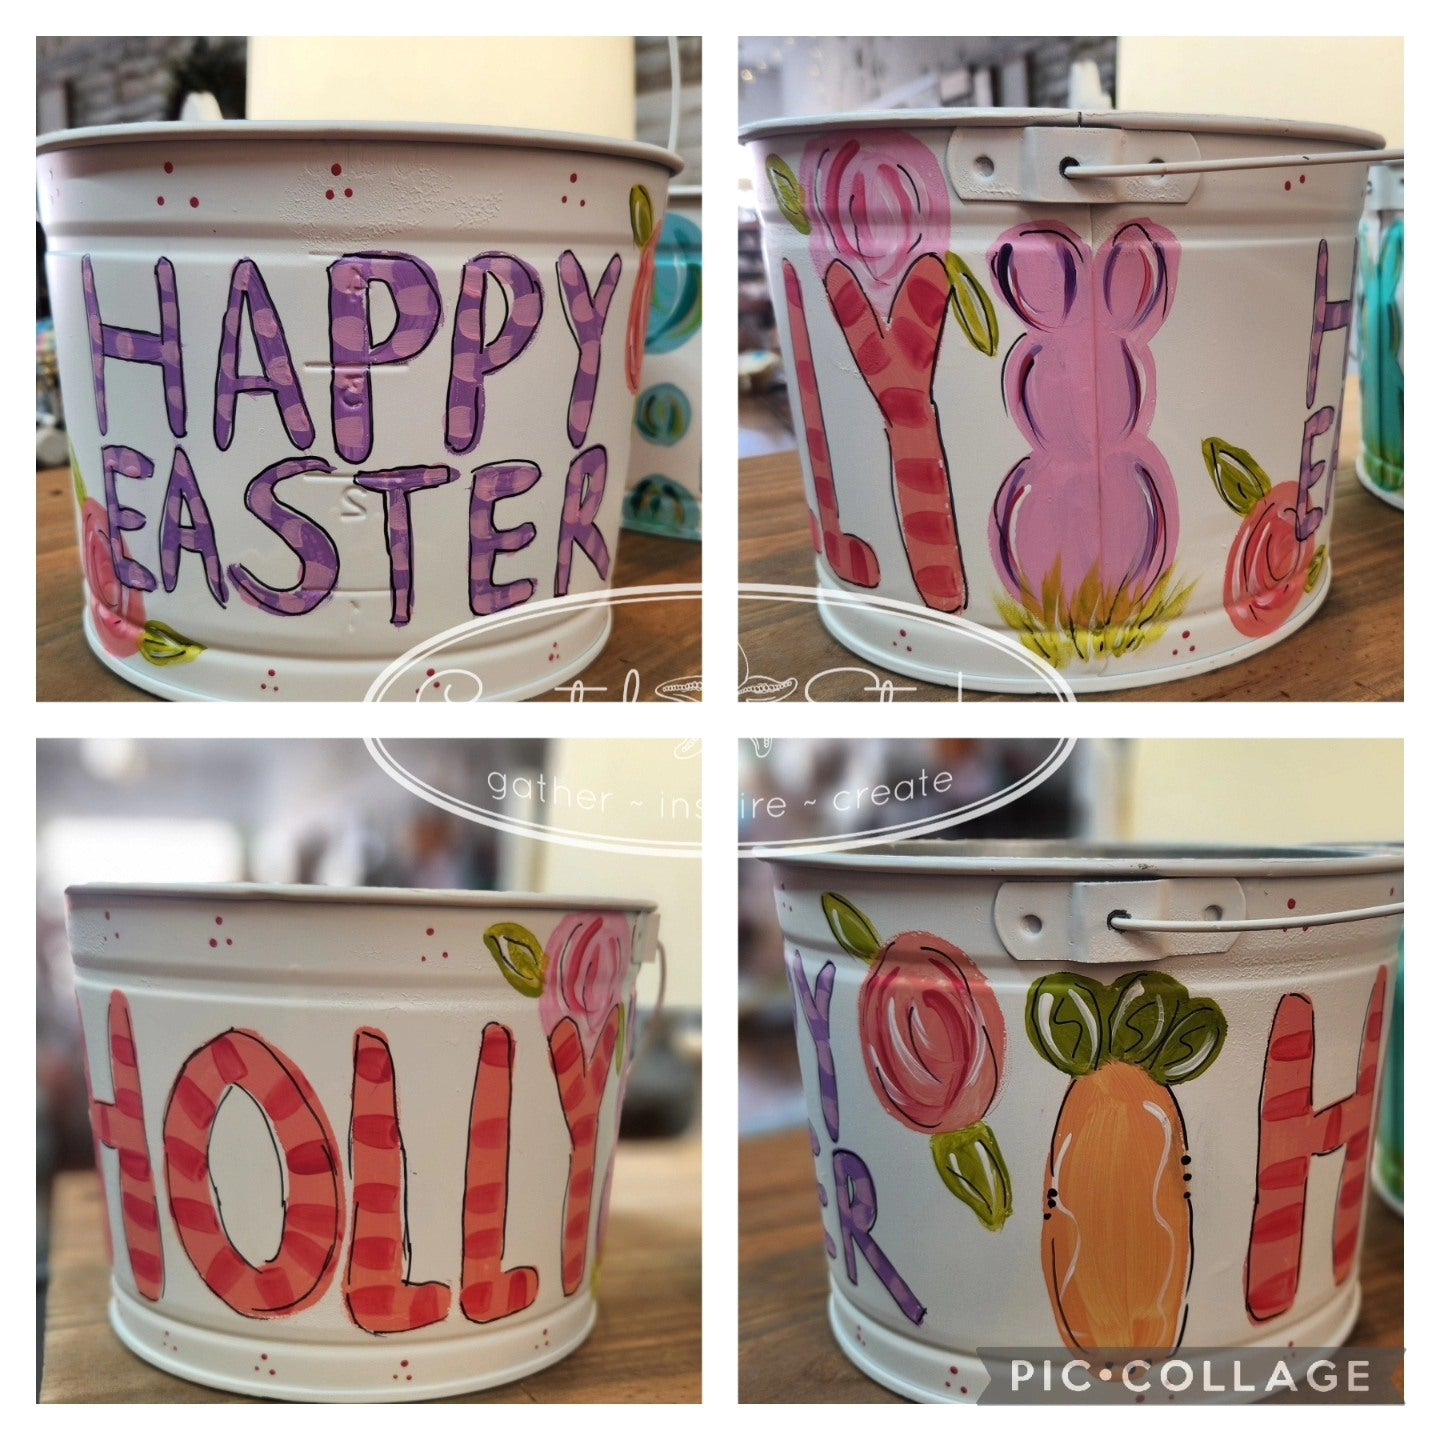 Personalized Easter Bucket